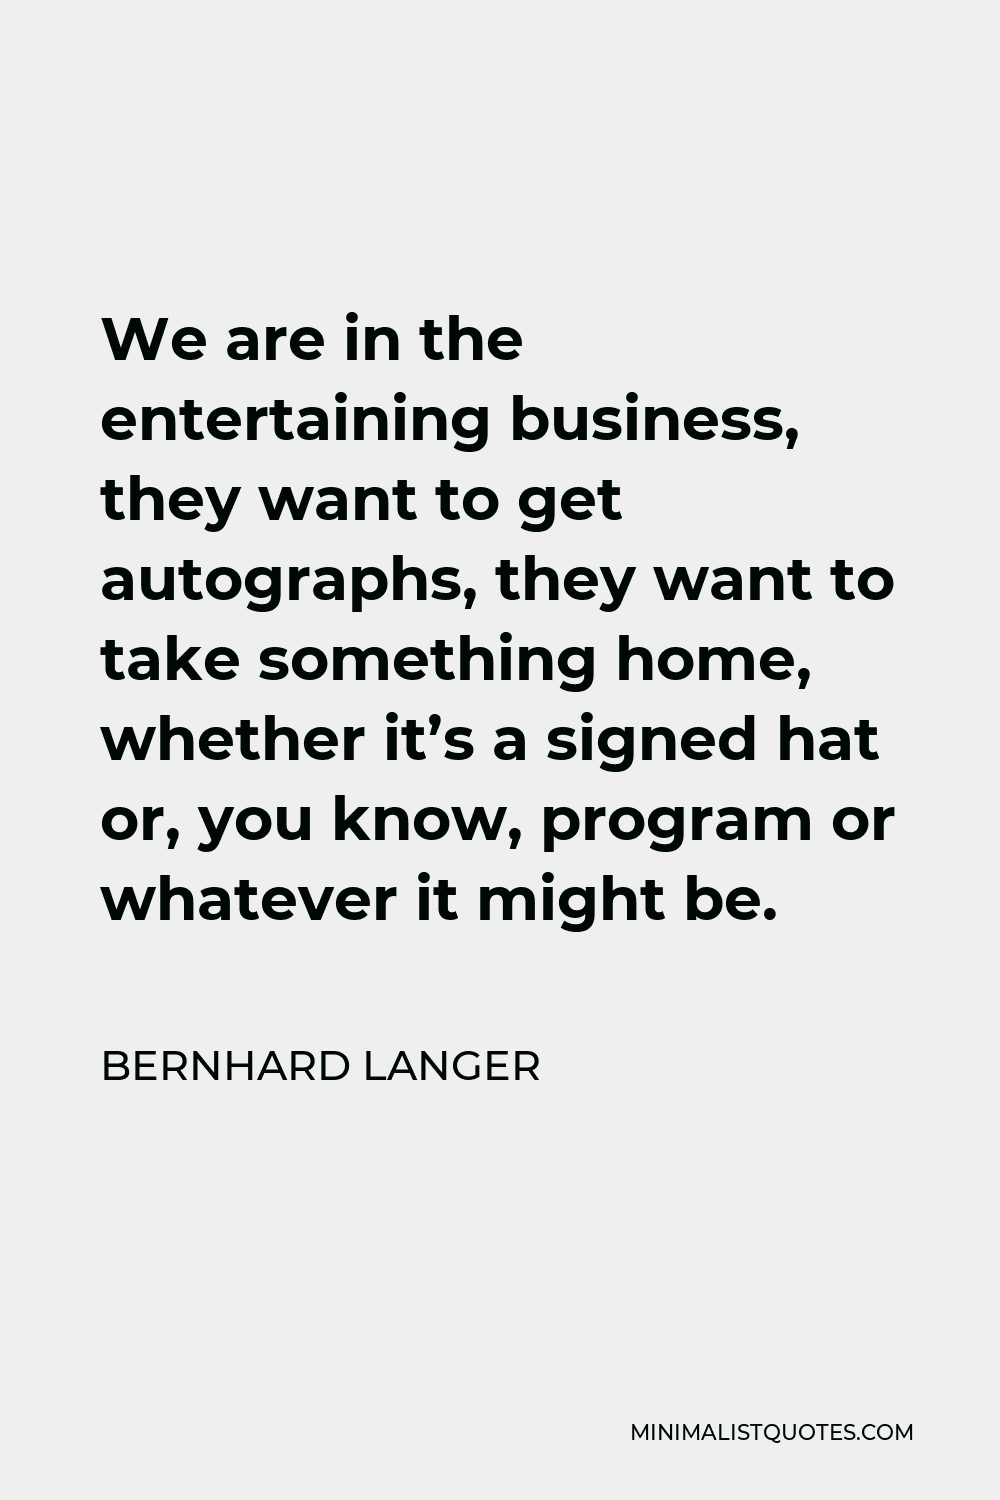 Bernhard Langer Quote - We are in the entertaining business, they want to get autographs, they want to take something home, whether it’s a signed hat or, you know, program or whatever it might be.